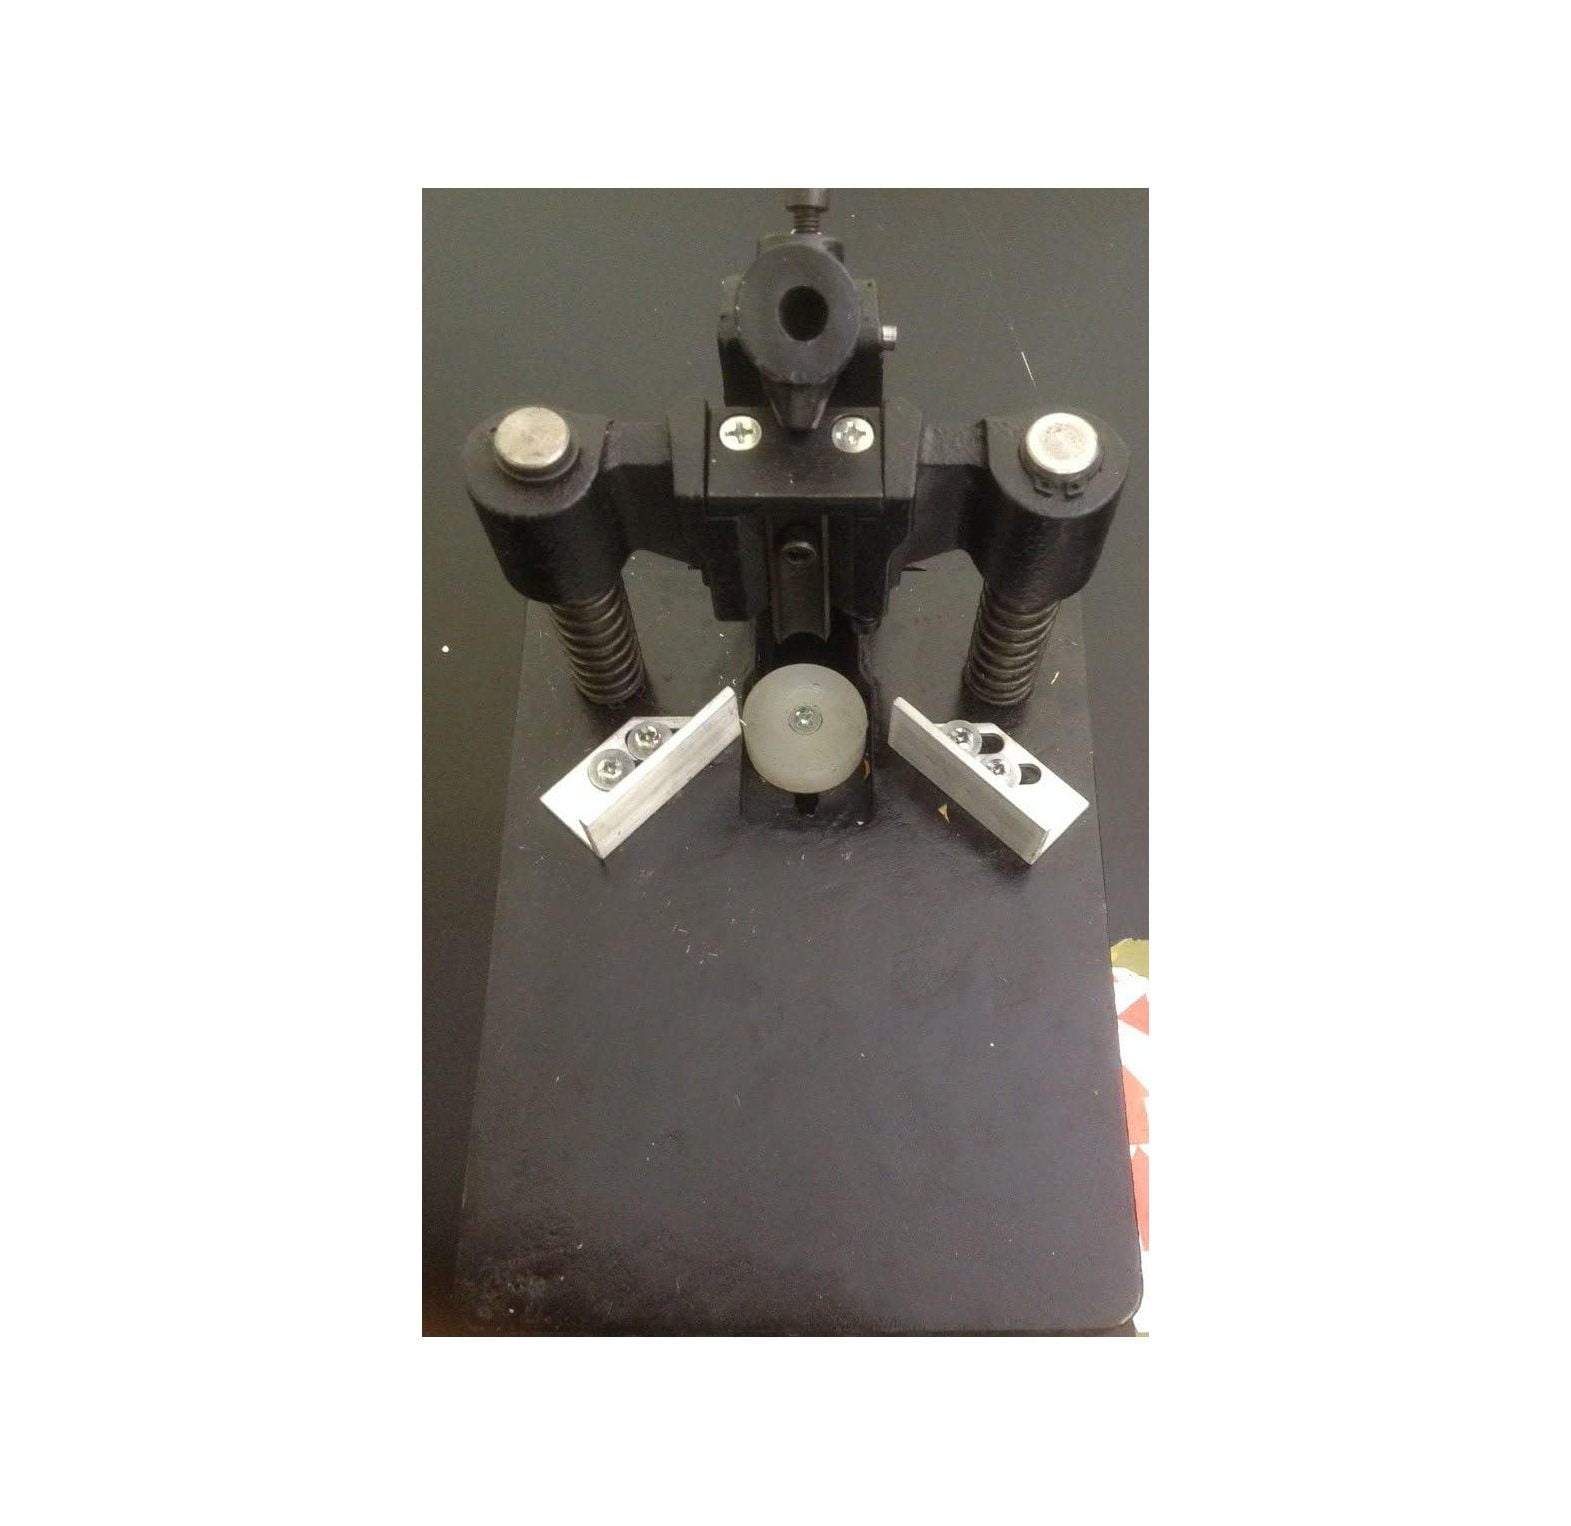 Corner Rounder Cutter 2 Dies R6 R10 Thickness with Paper Holding